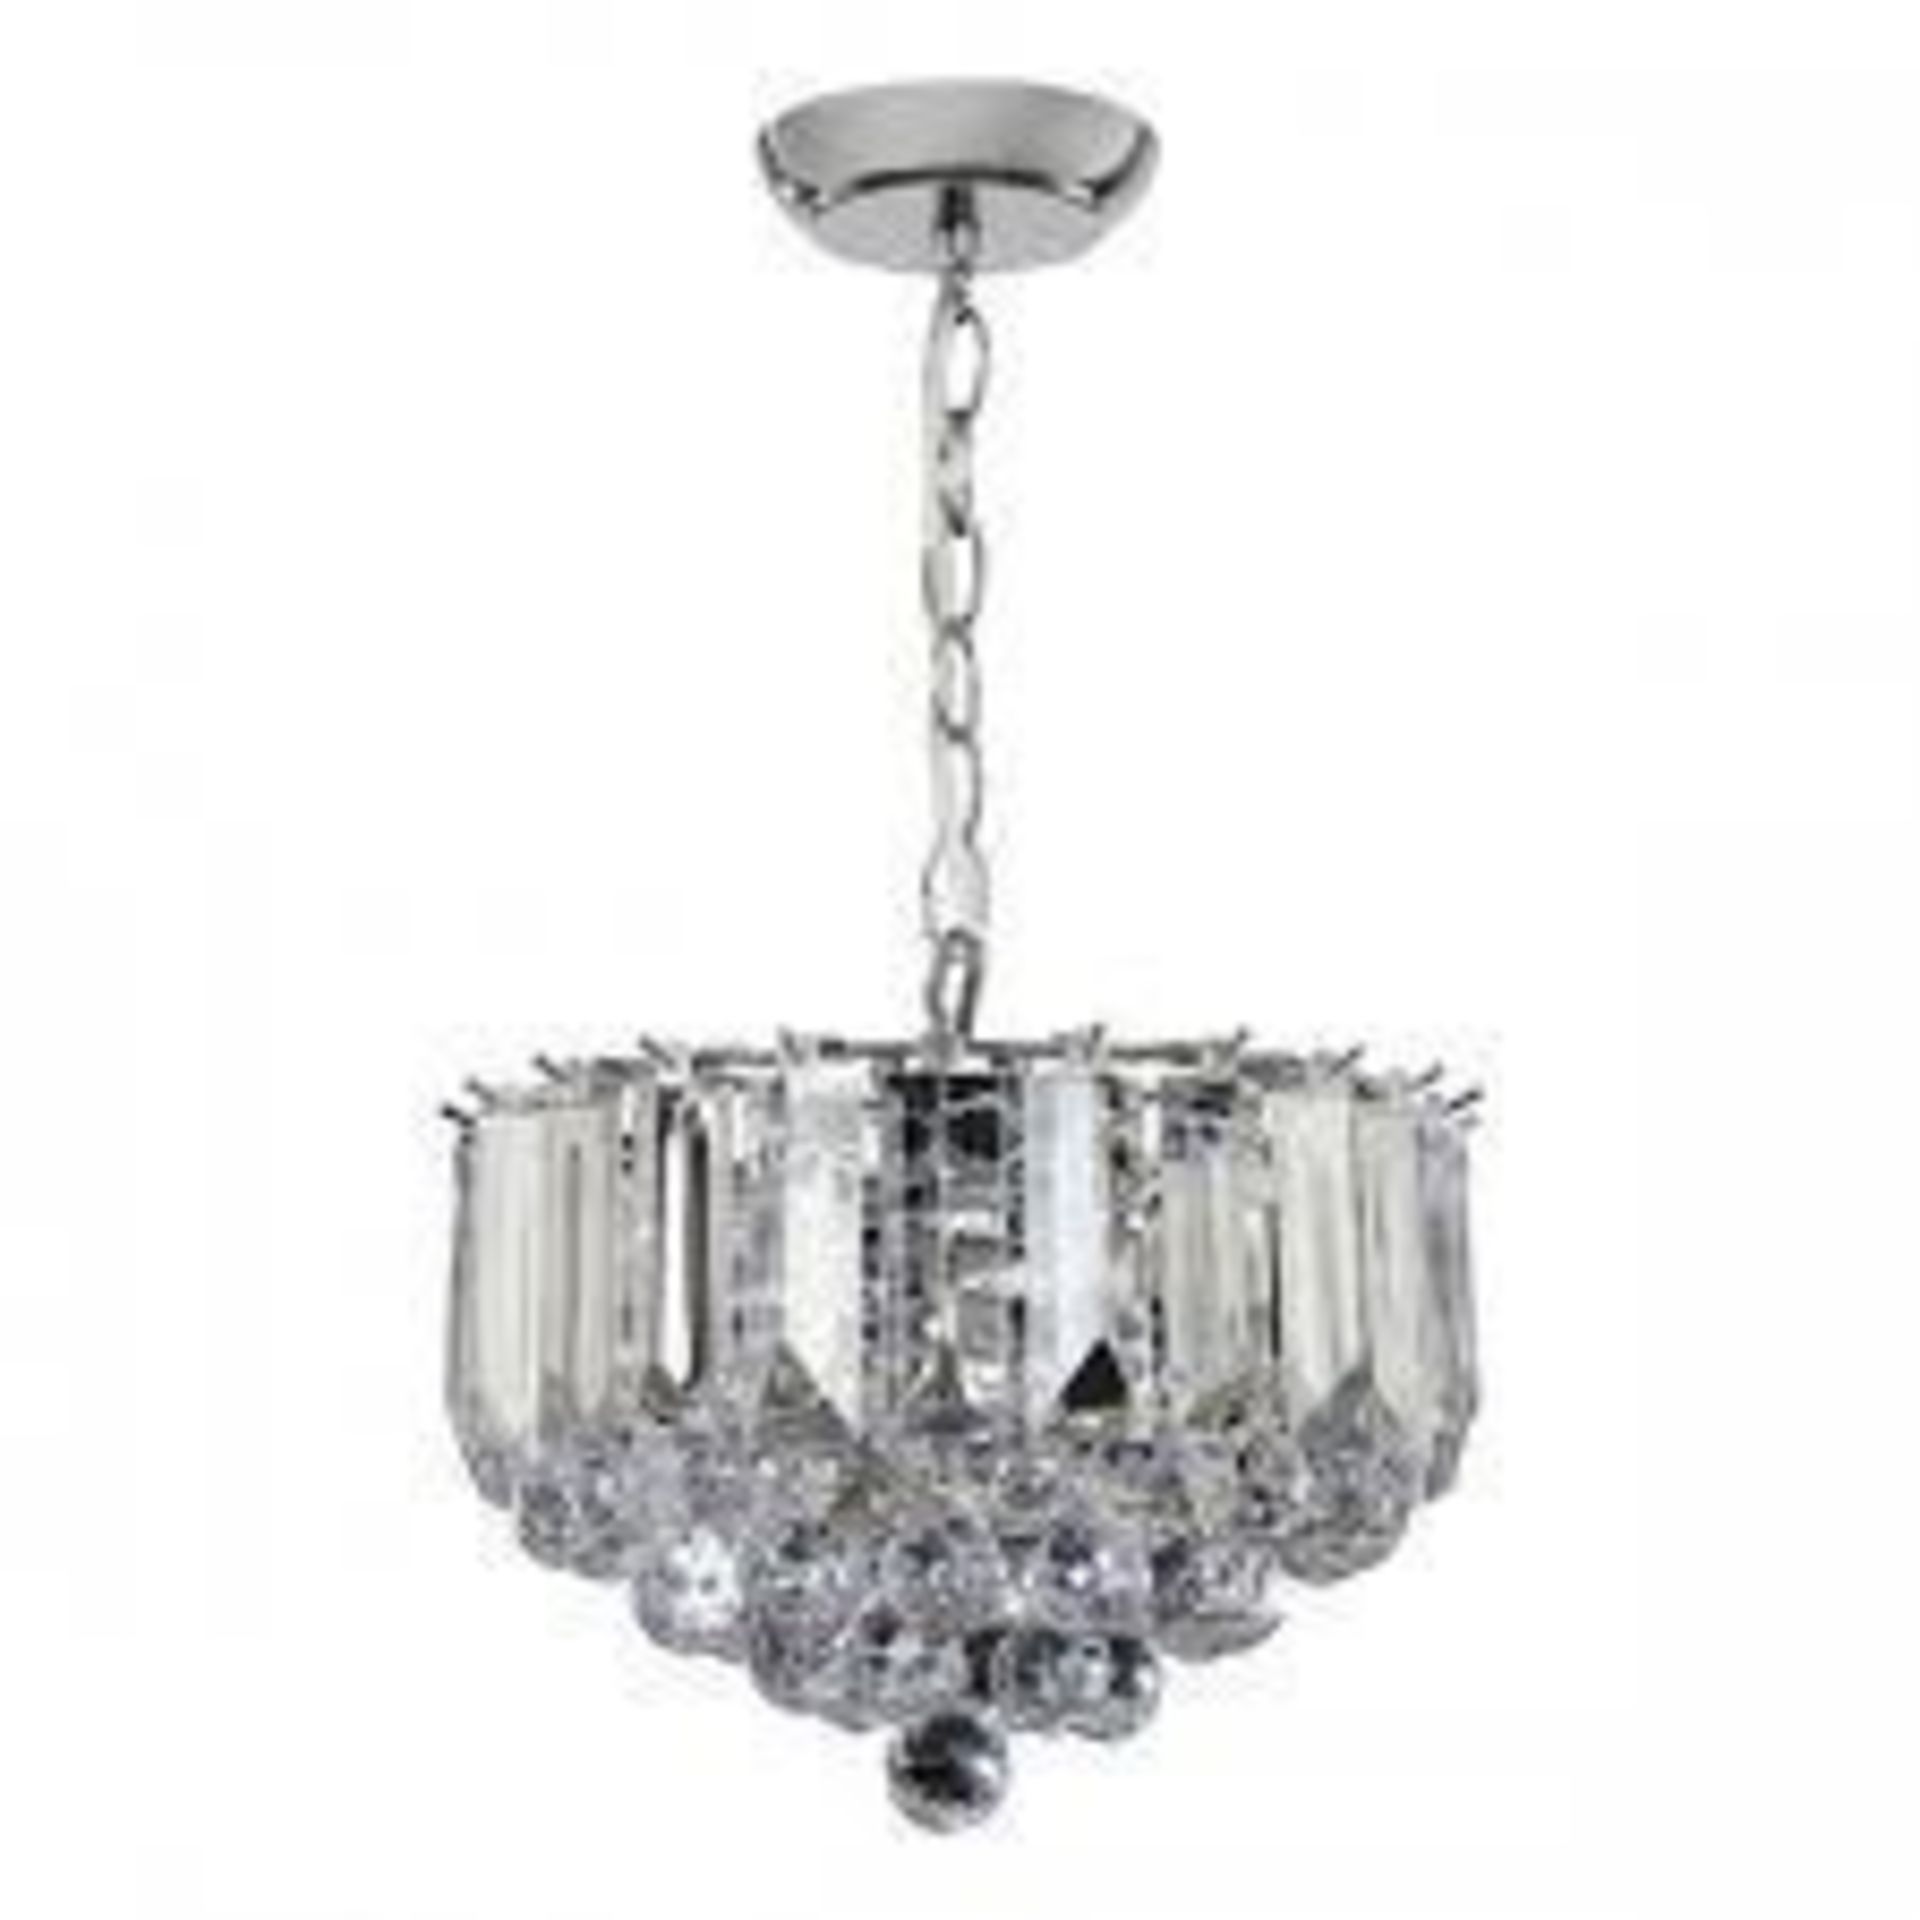 Boxed Endon Lighting Gold And Glass Designer Ceiling Light RRP £70 (15050) (Public Viewing and